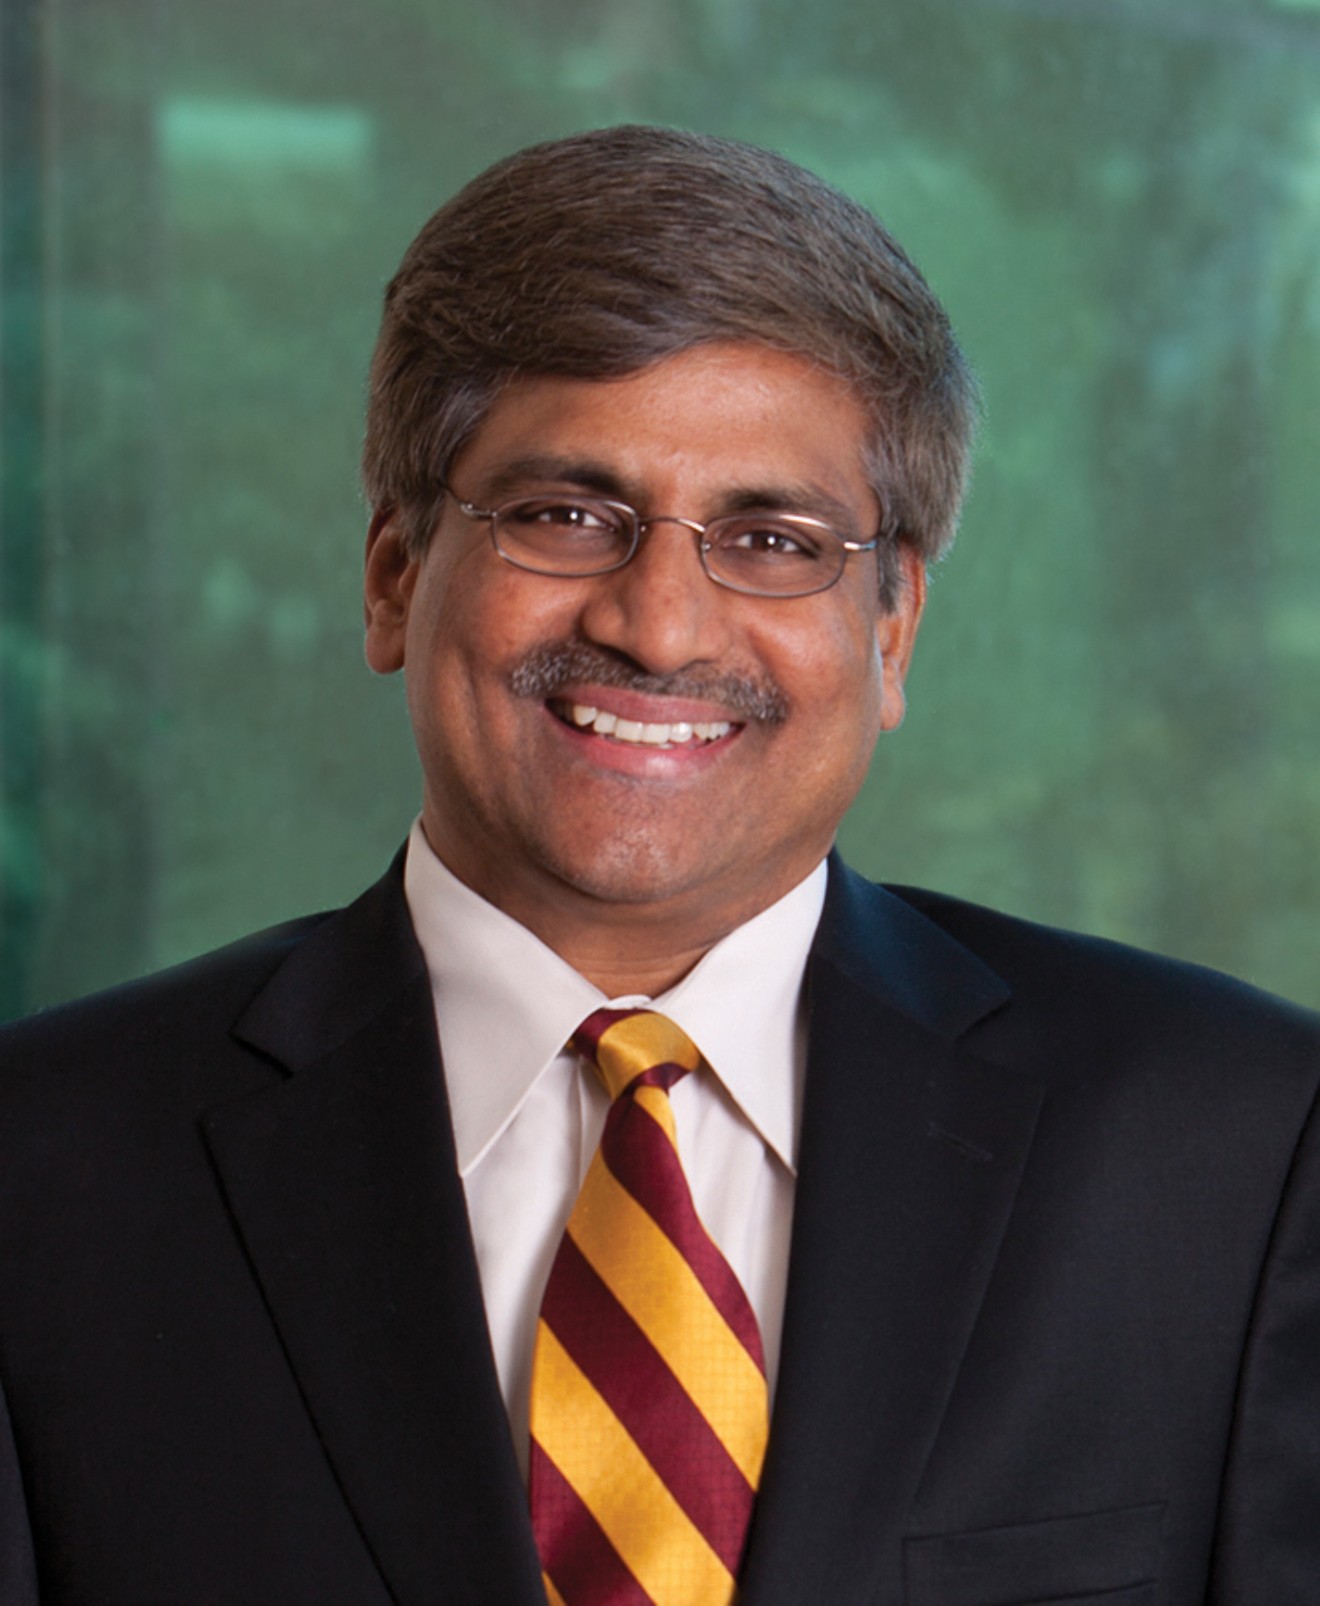 Sethuraman Panchanathan is on leave from ASU while he heads a federal research agency.